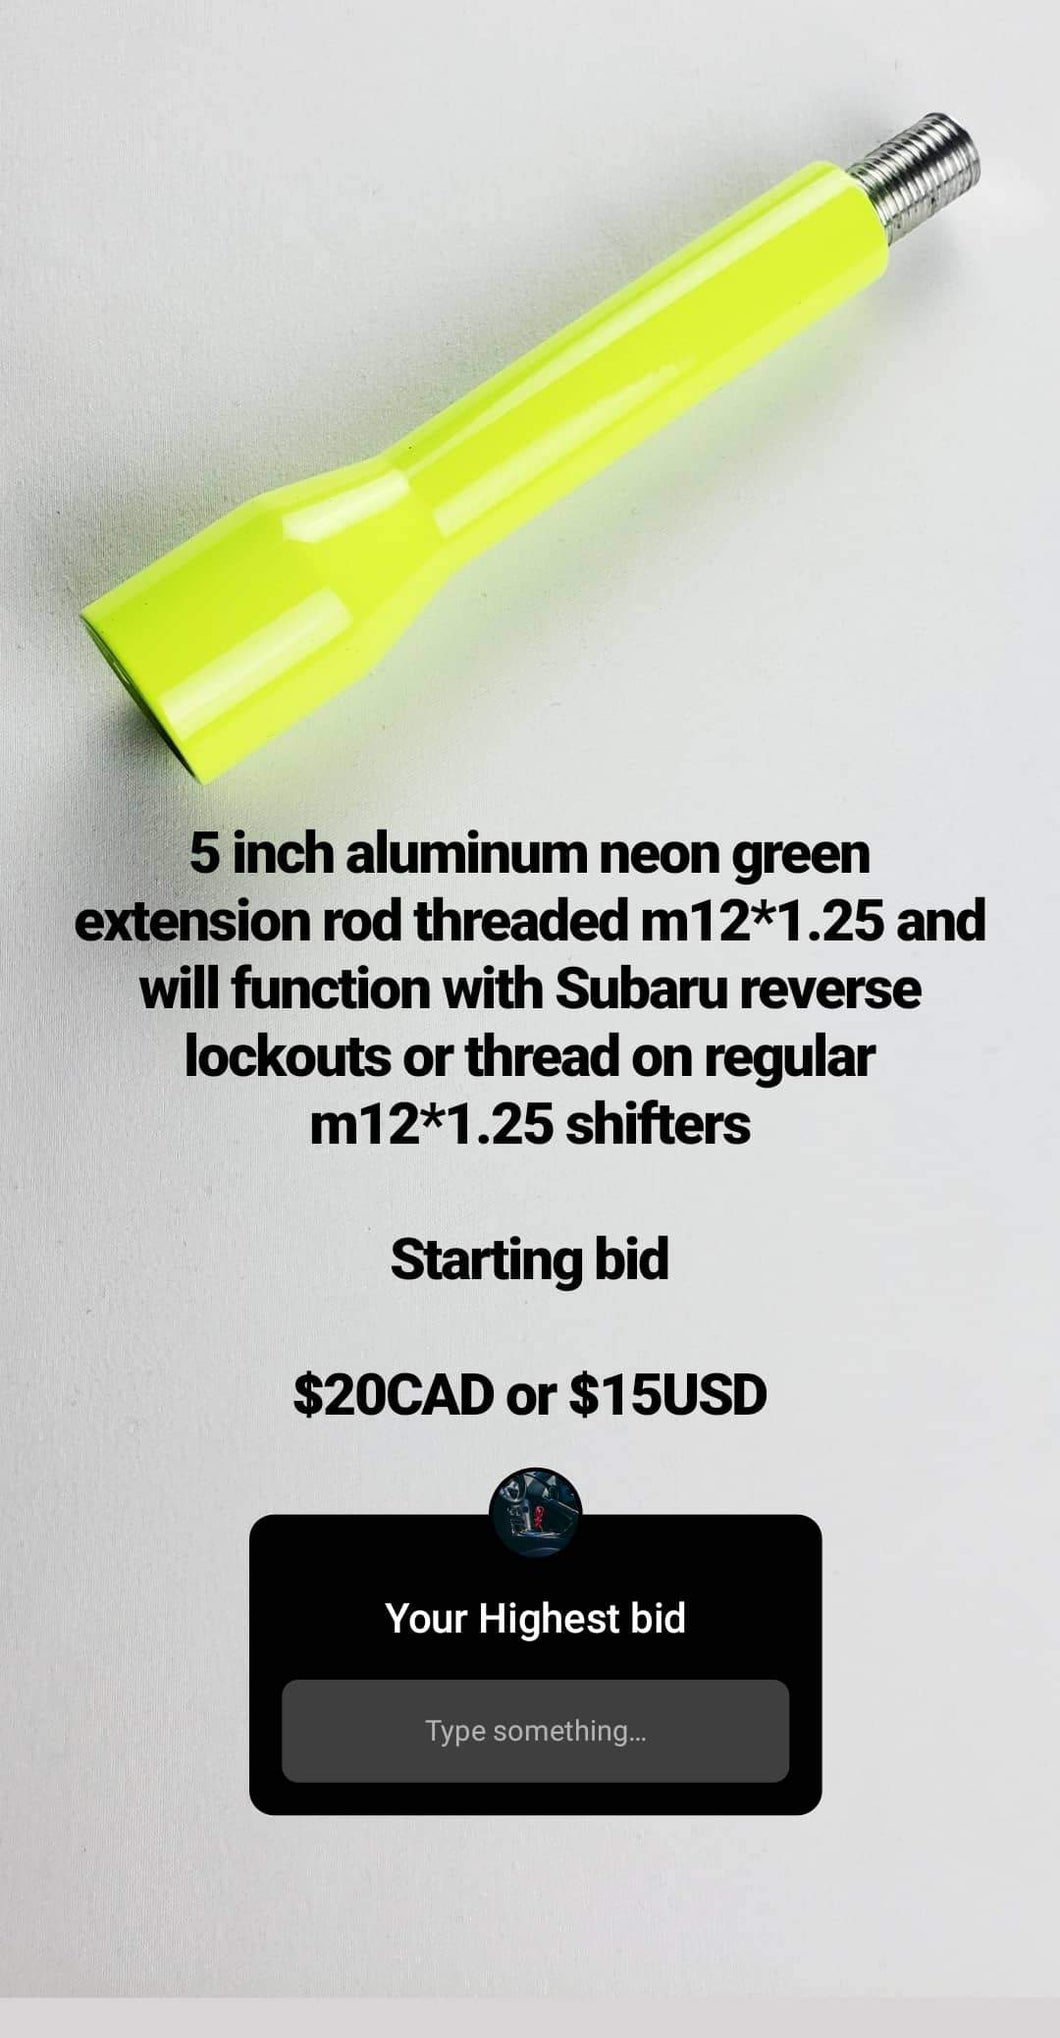 Neon green 5 inch extension